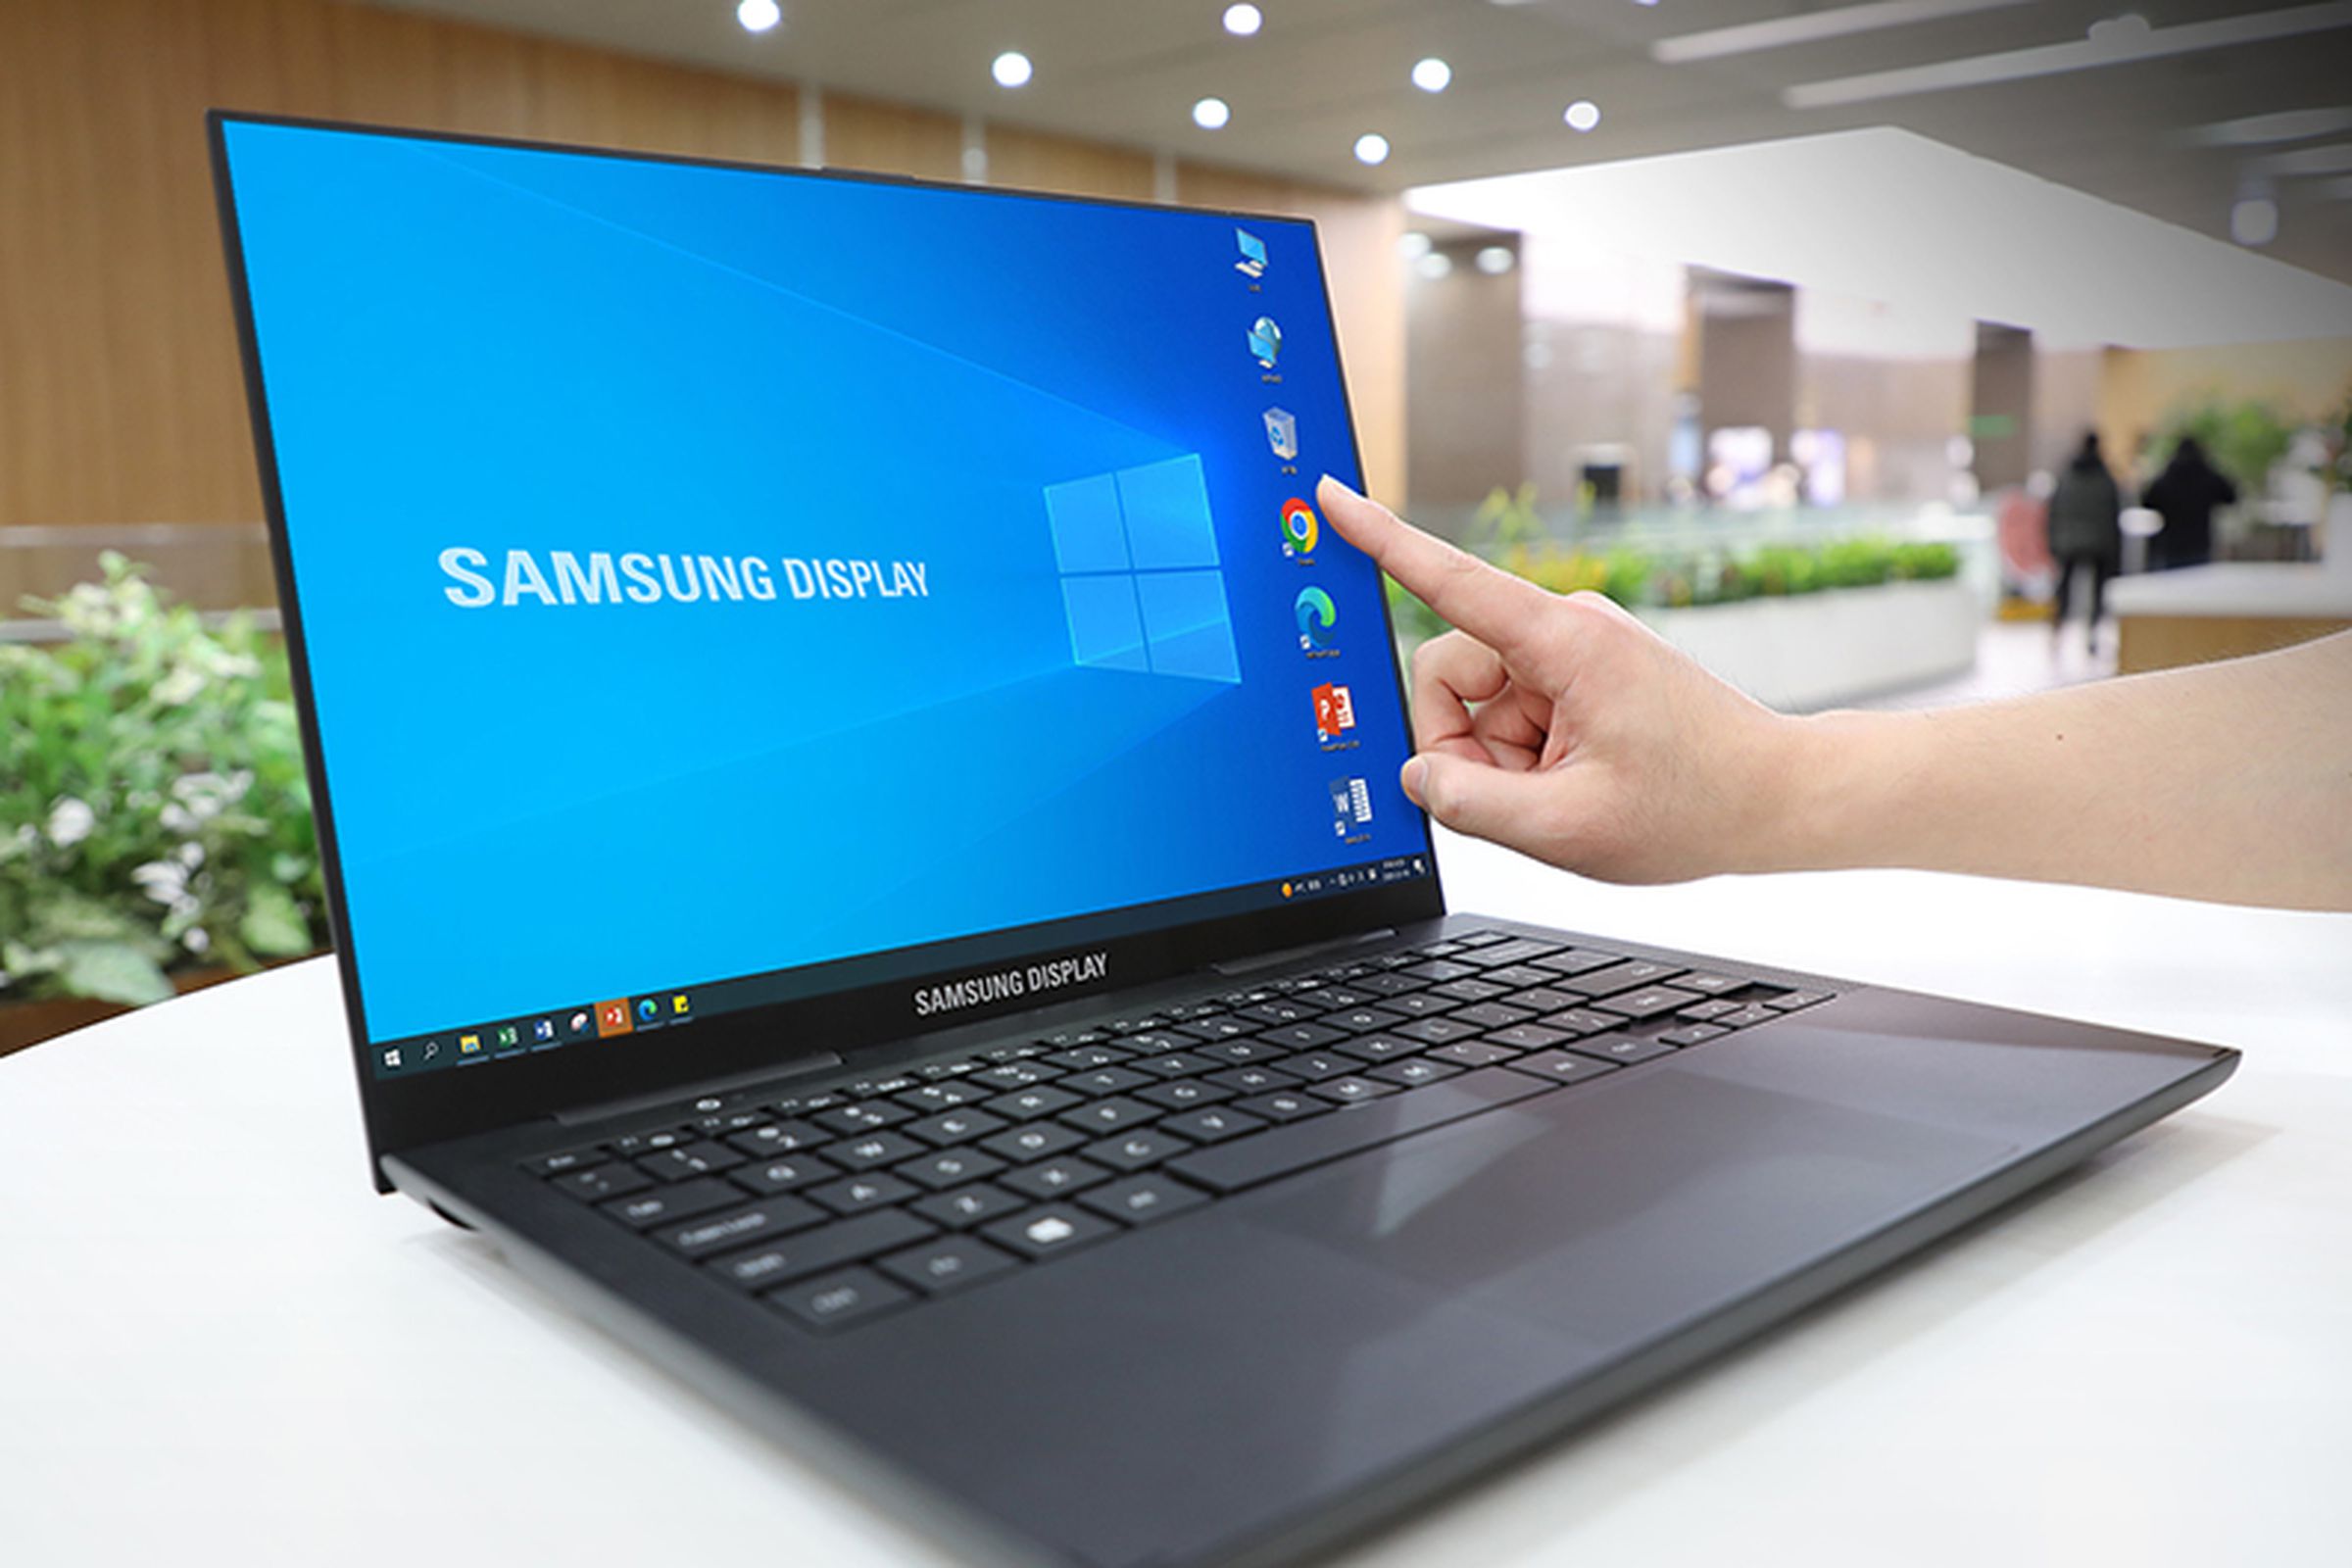 An image showing an OLED Samsung display on a notebook with touchscreen capabilities 